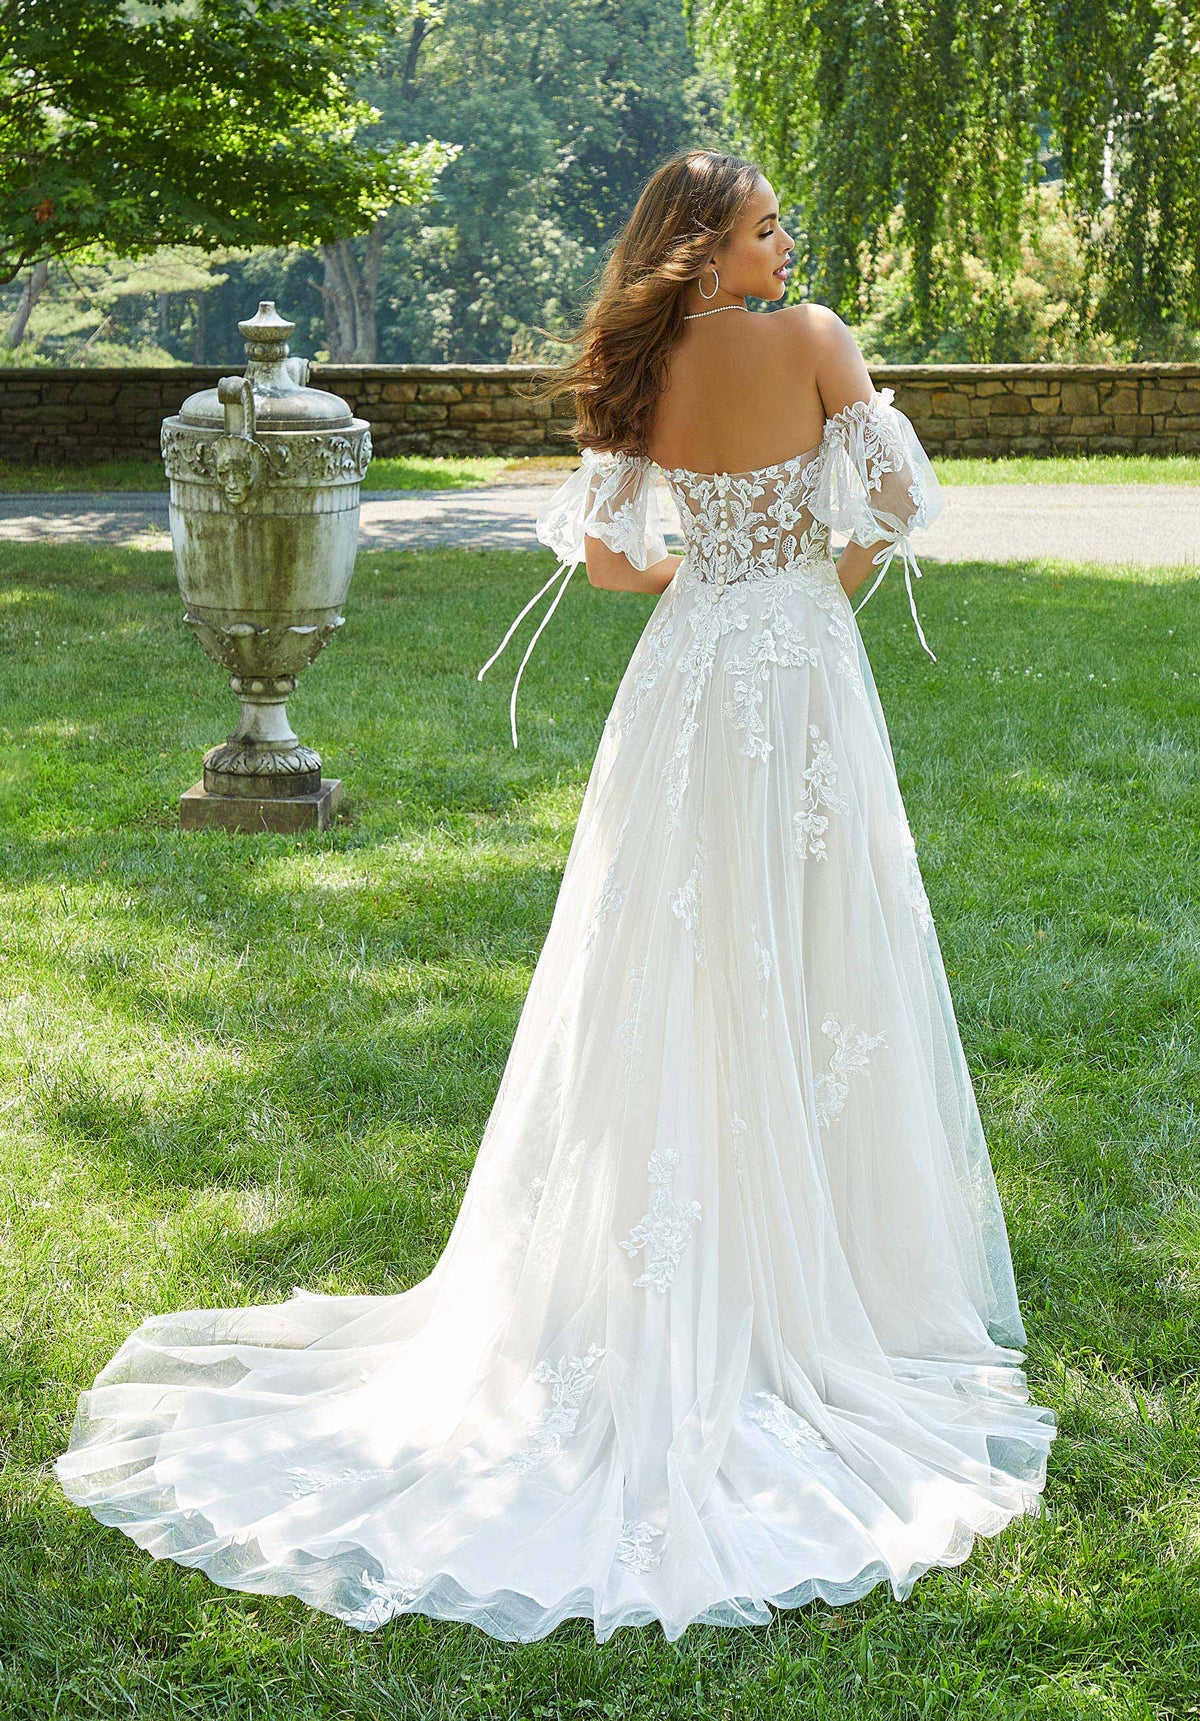 Voyage - 6961 - Dulcie - Cheron's Bridal, Wedding Gown - Morilee Voyage - - Wedding Gowns Dresses Chattanooga Hixson Shops Boutiques Tennessee TN Georgia GA MSRP Lowest Prices Sale Discount